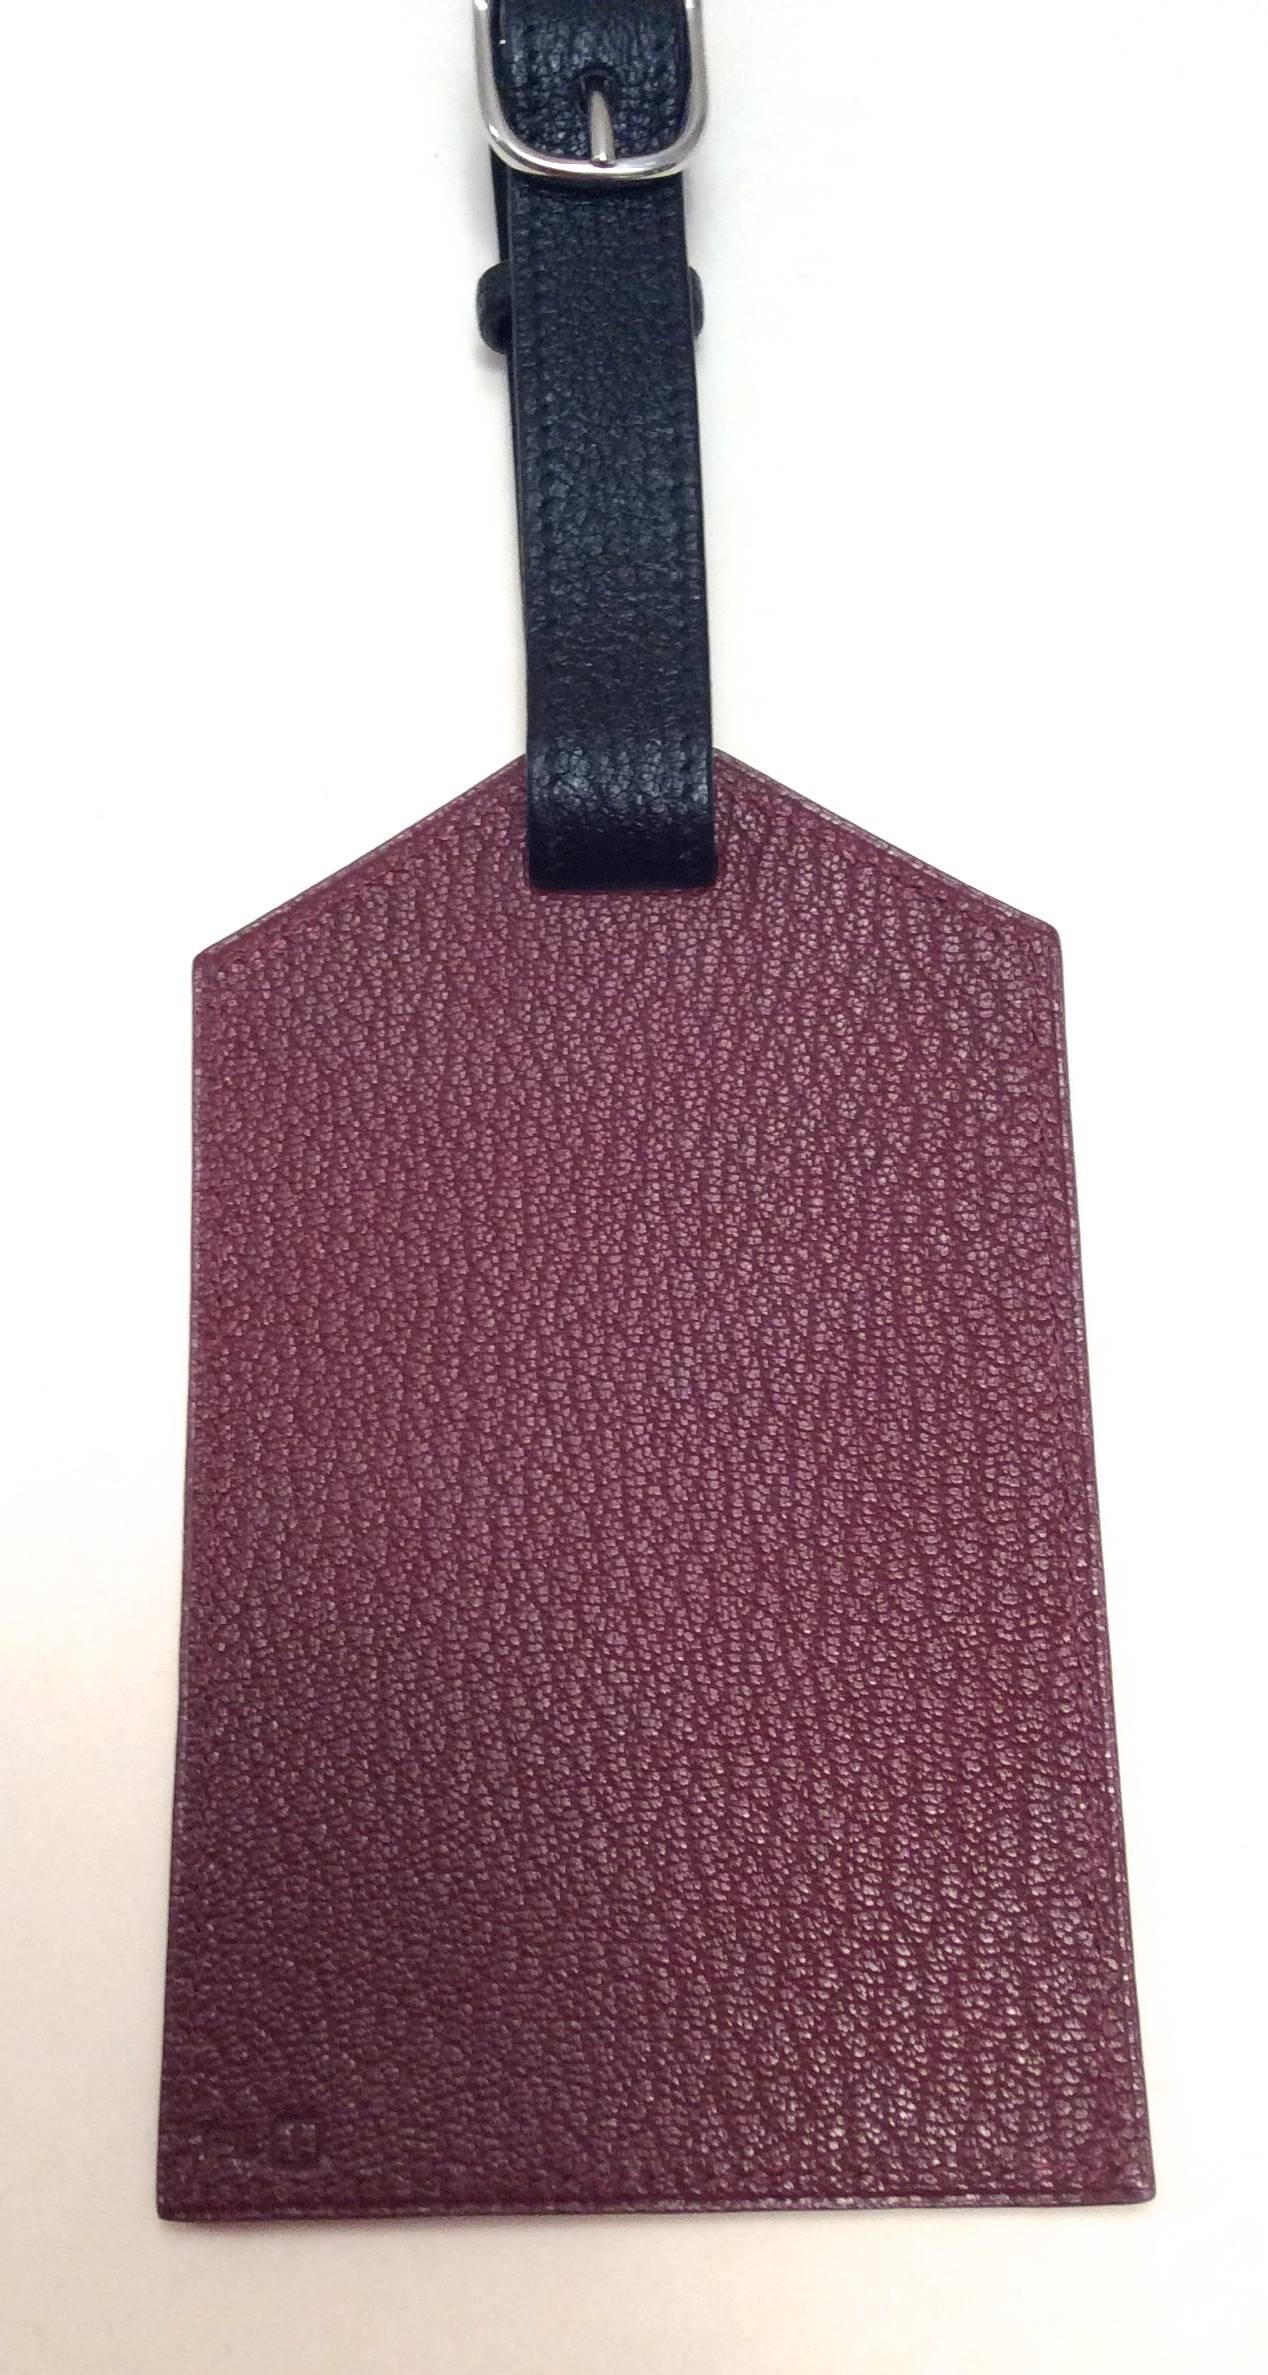 New Hermes Luggage Tag / Bag Charm - Red and Black In New Condition For Sale In Boca Raton, FL